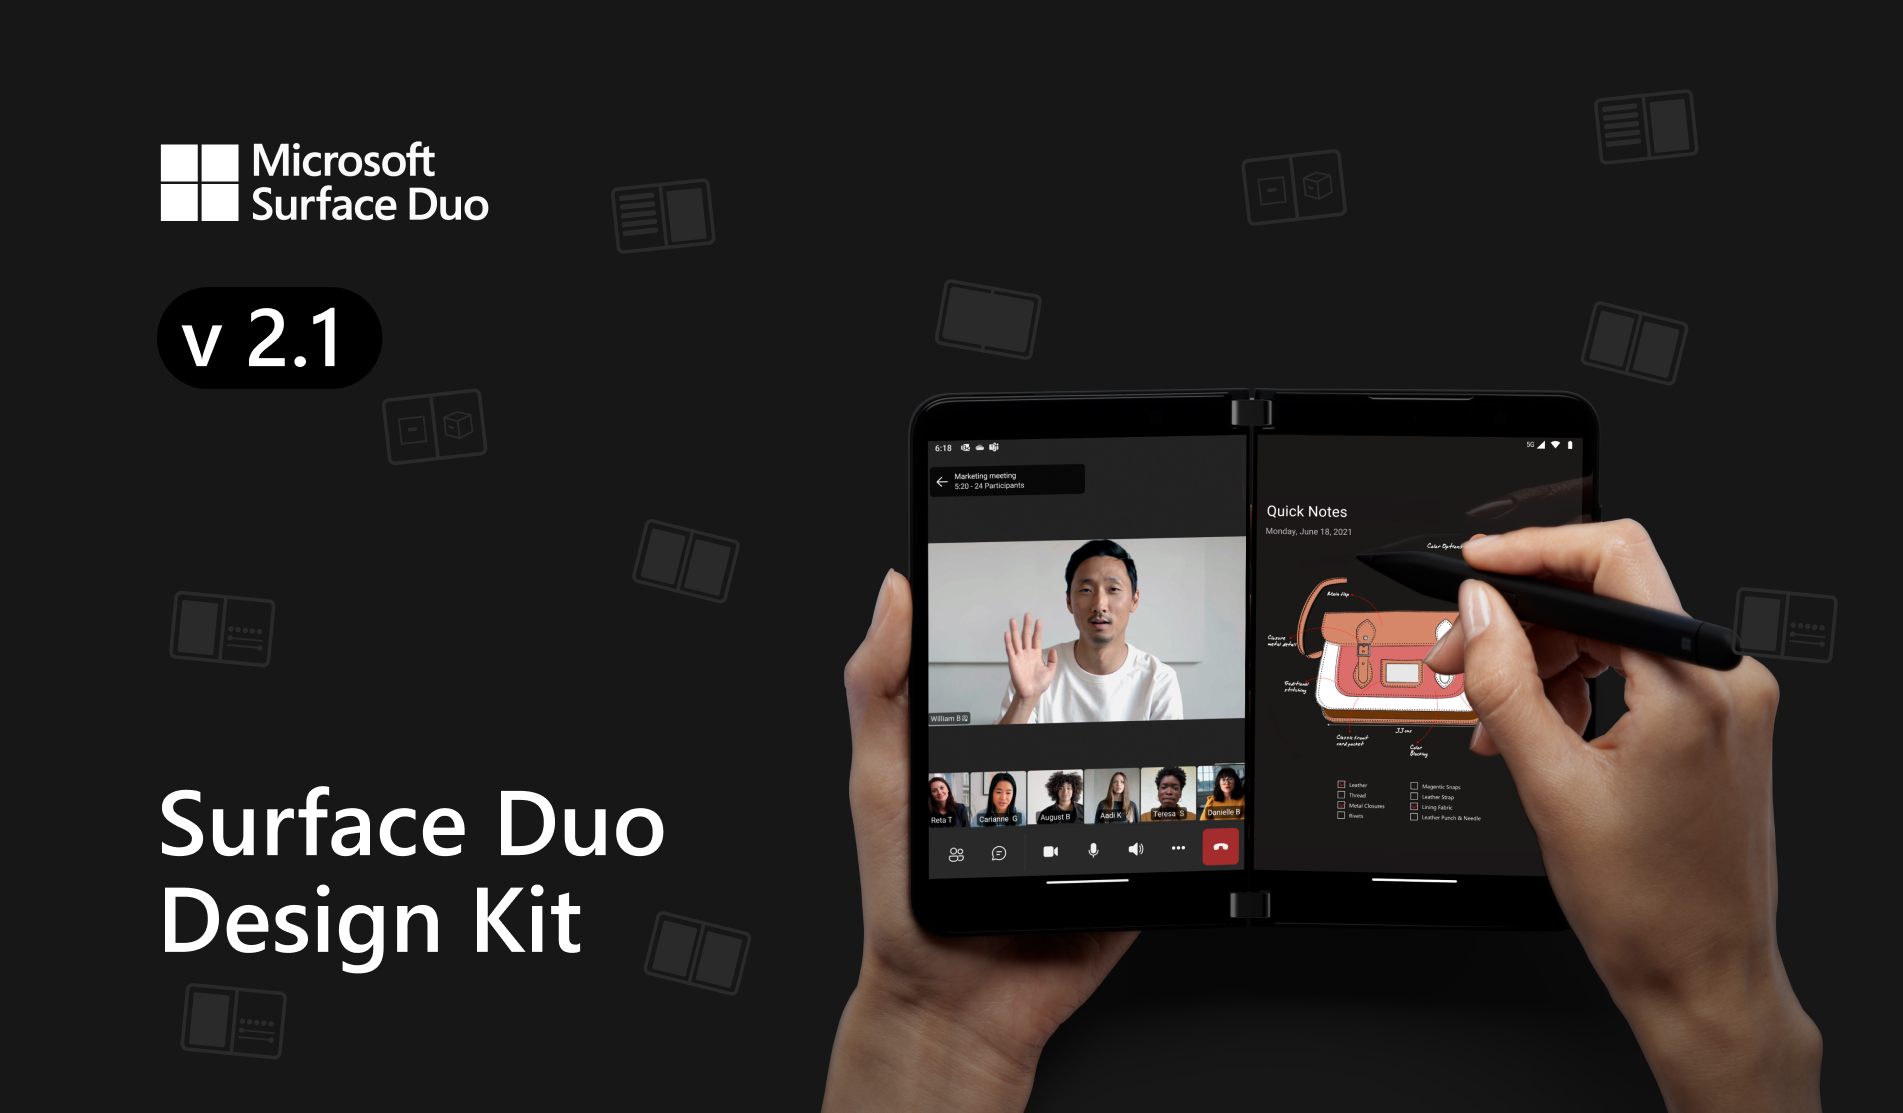 Surface Duo Design Kit title card showing a Surface Duo device in use